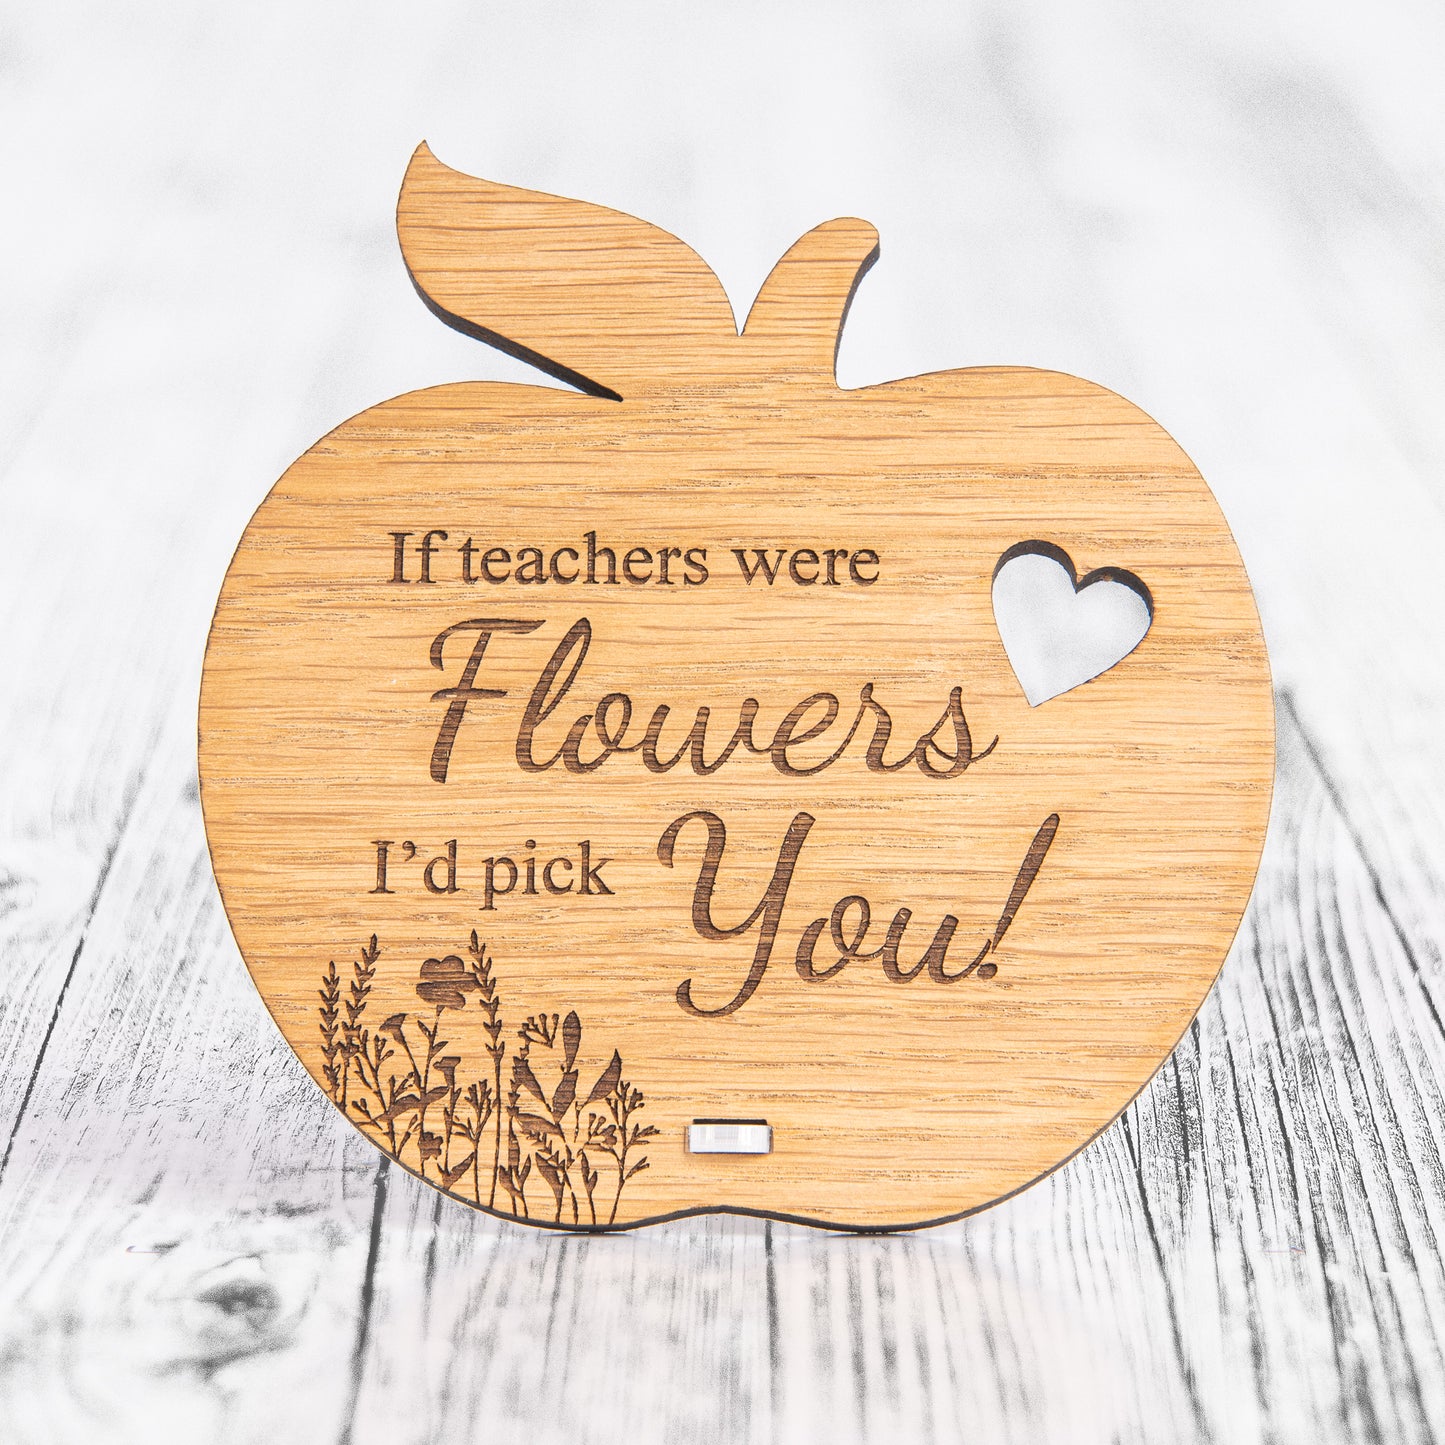 Personalised Thank You Gift For Teacher - Wooden Apple Plaque